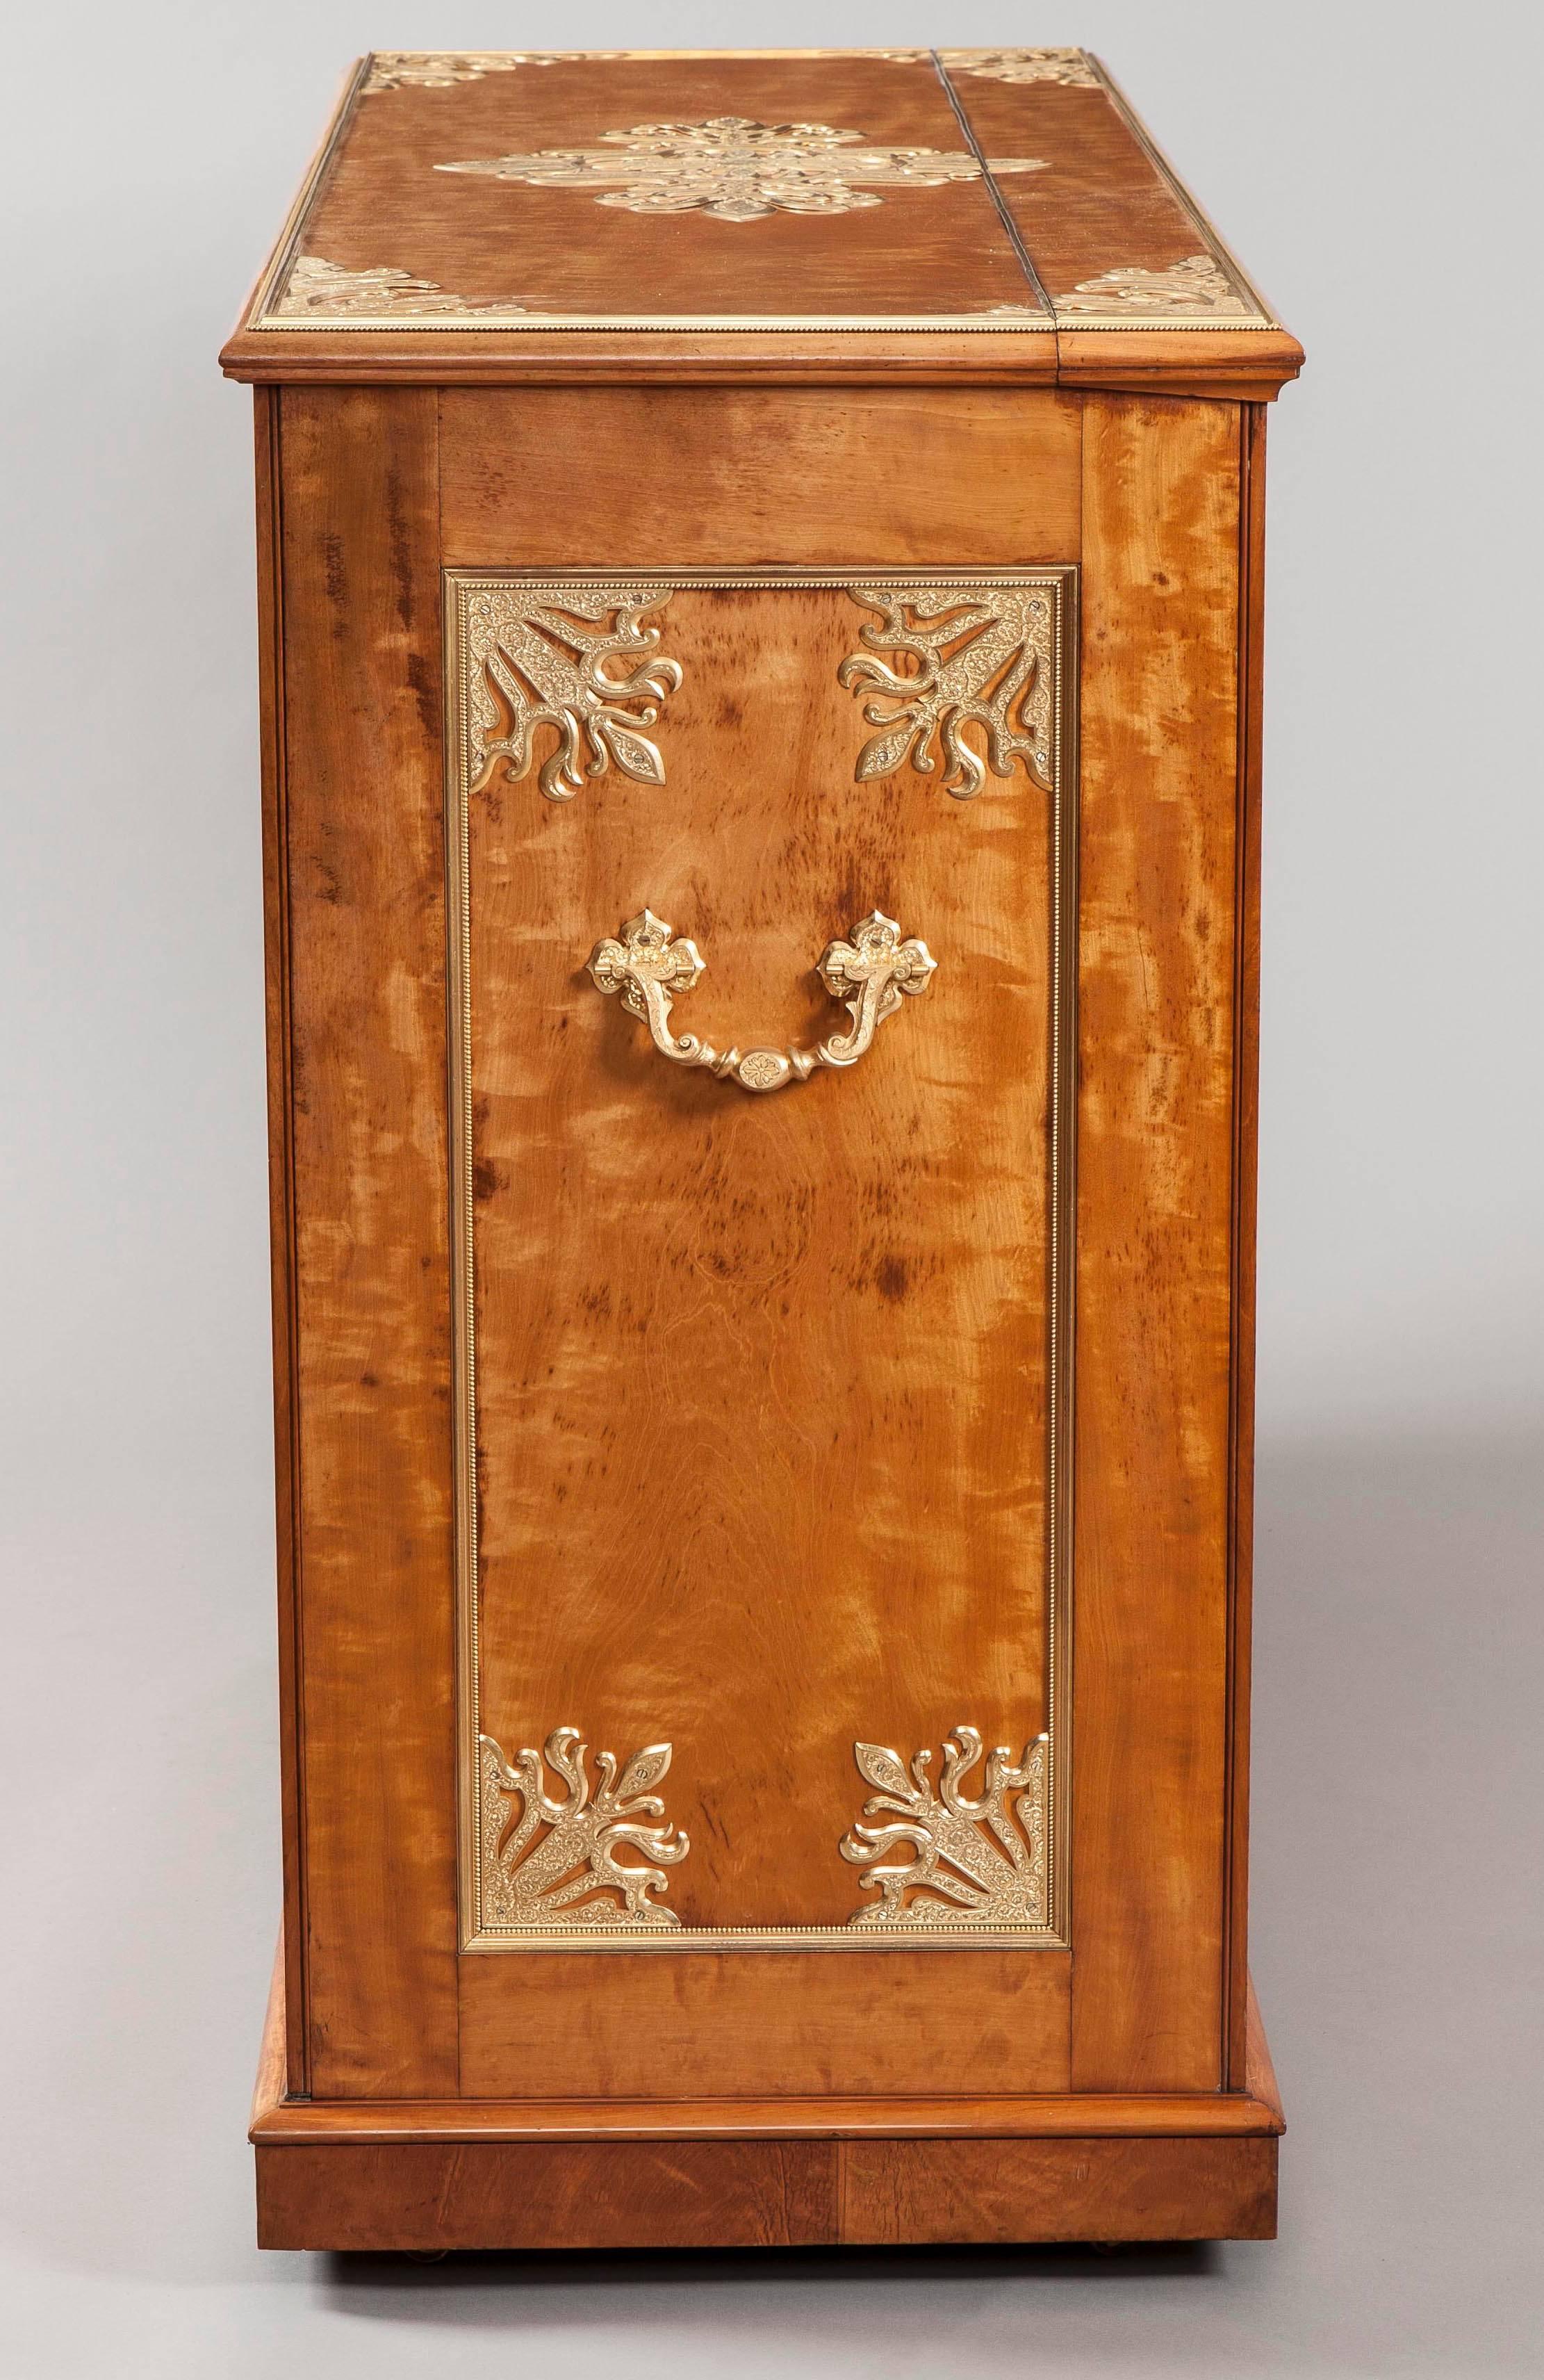 Victorian English 19th Century Satinwood and Ormolu Folio Cabinet with Expandable Easel For Sale